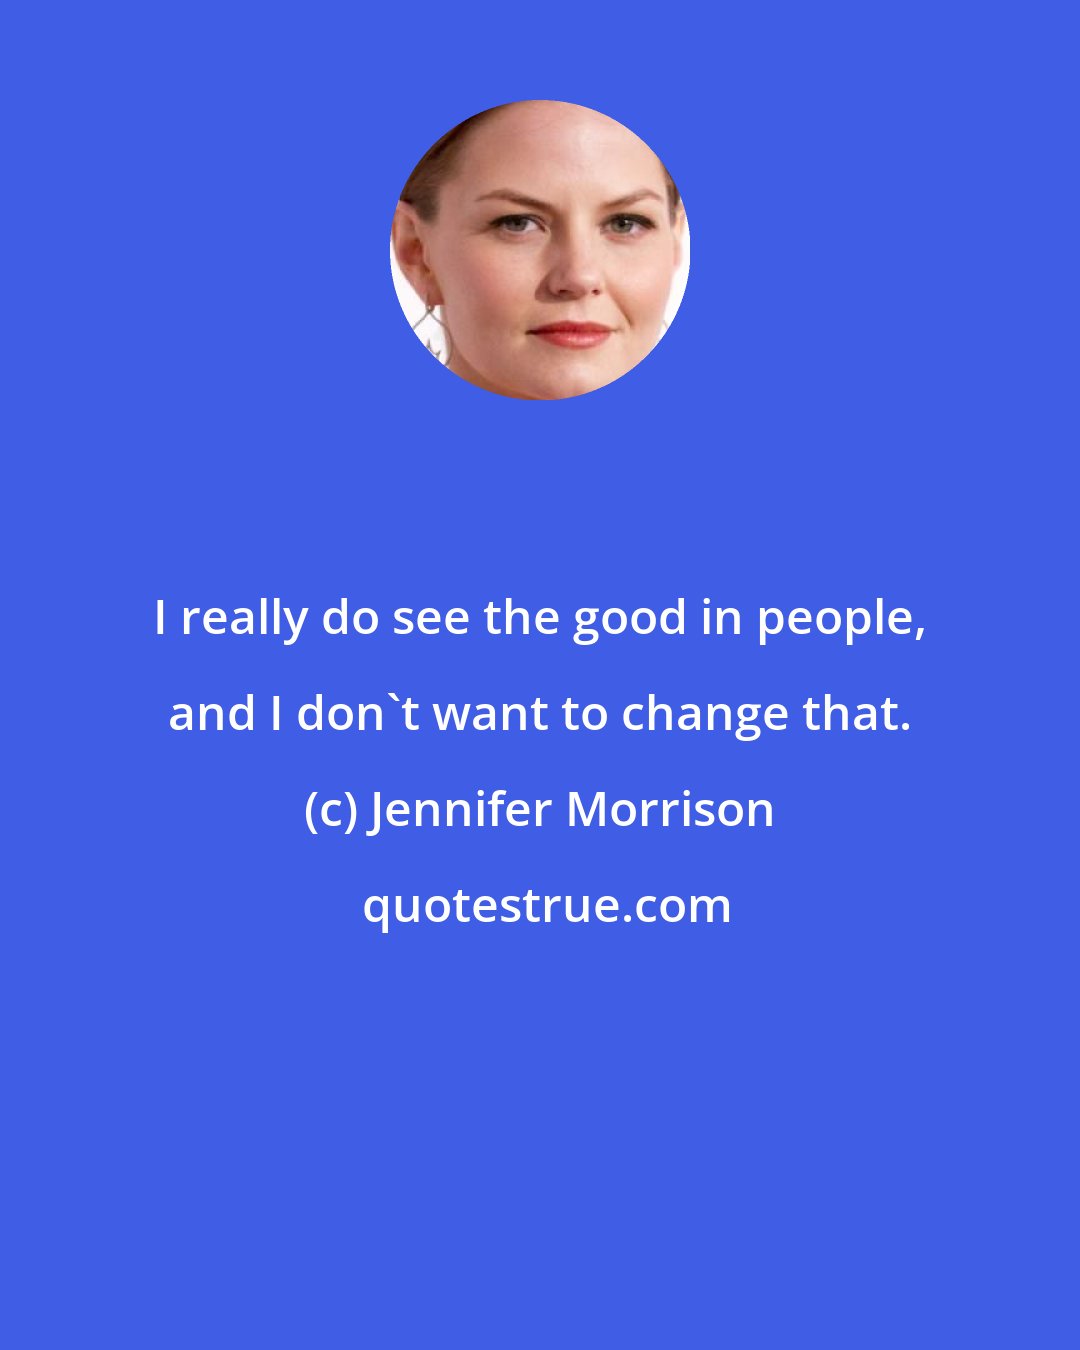 Jennifer Morrison: I really do see the good in people, and I don't want to change that.